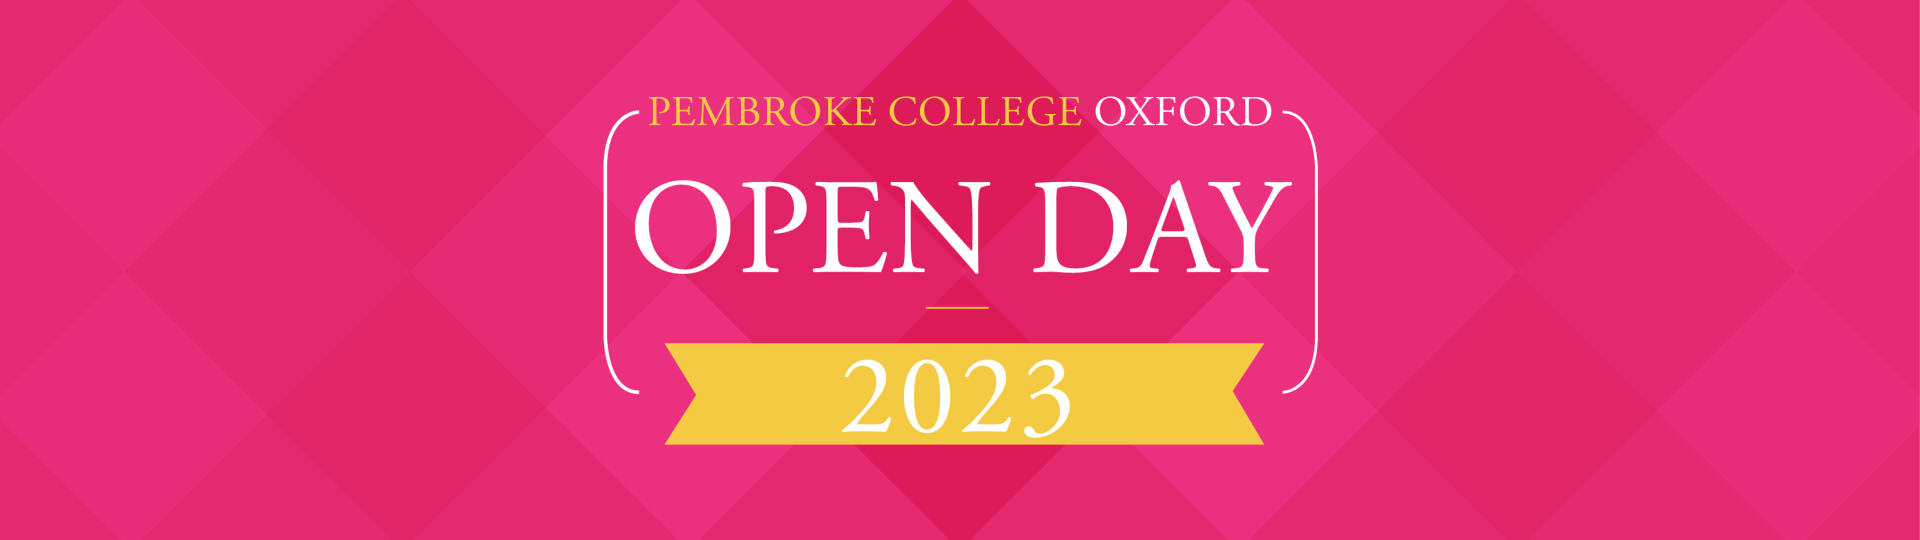 Open Day 2023 Banner